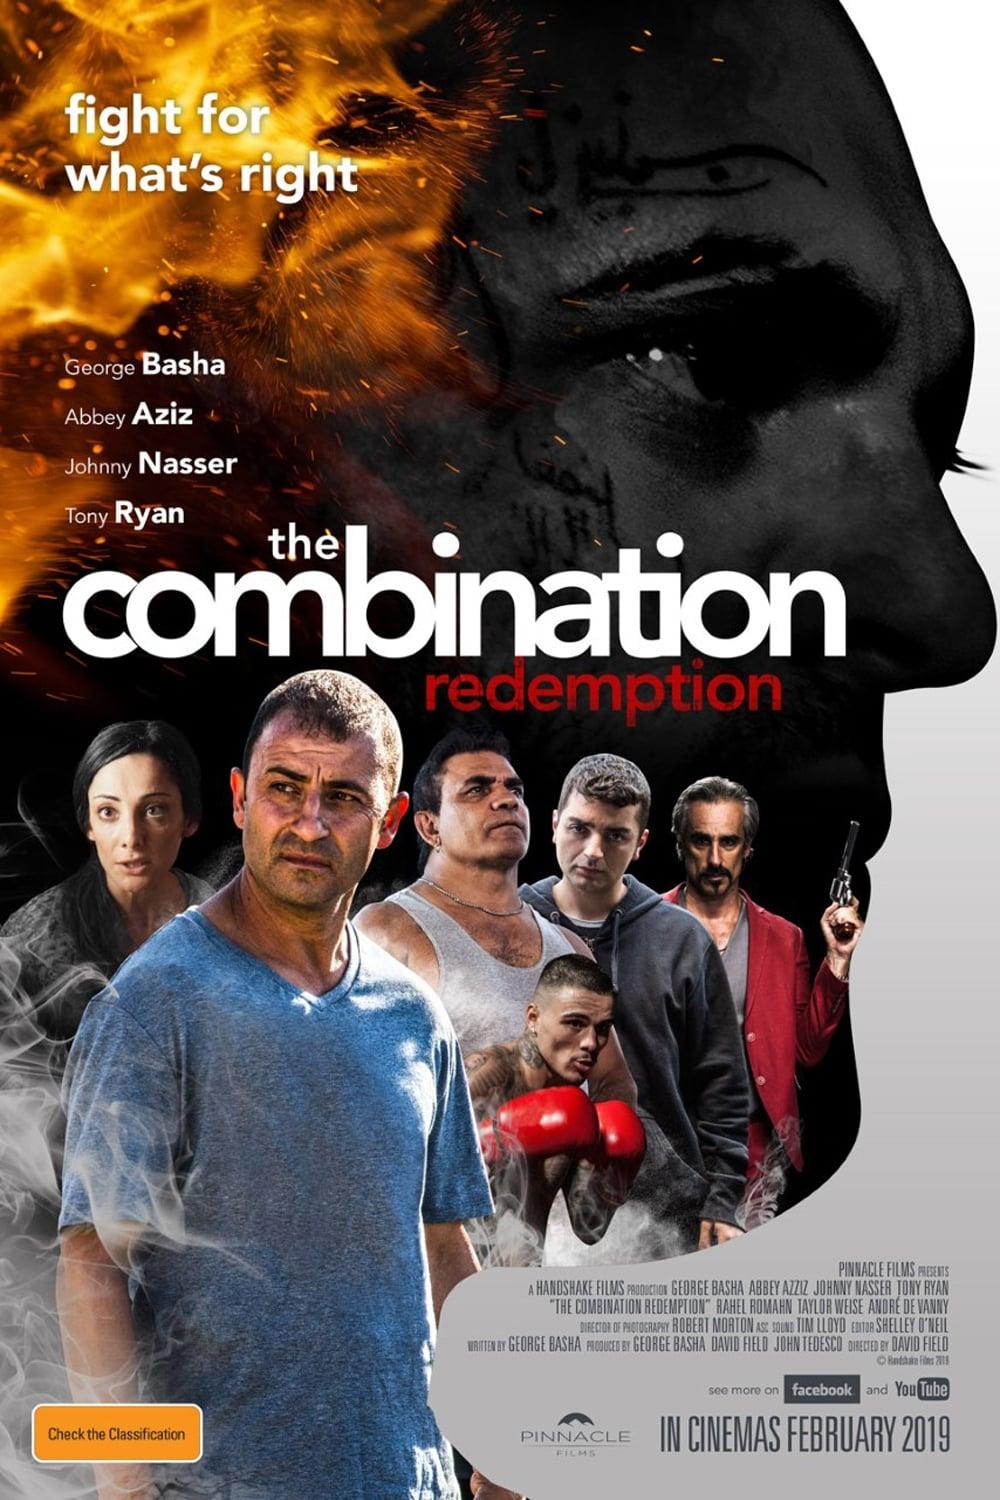 The Combination Redemption poster